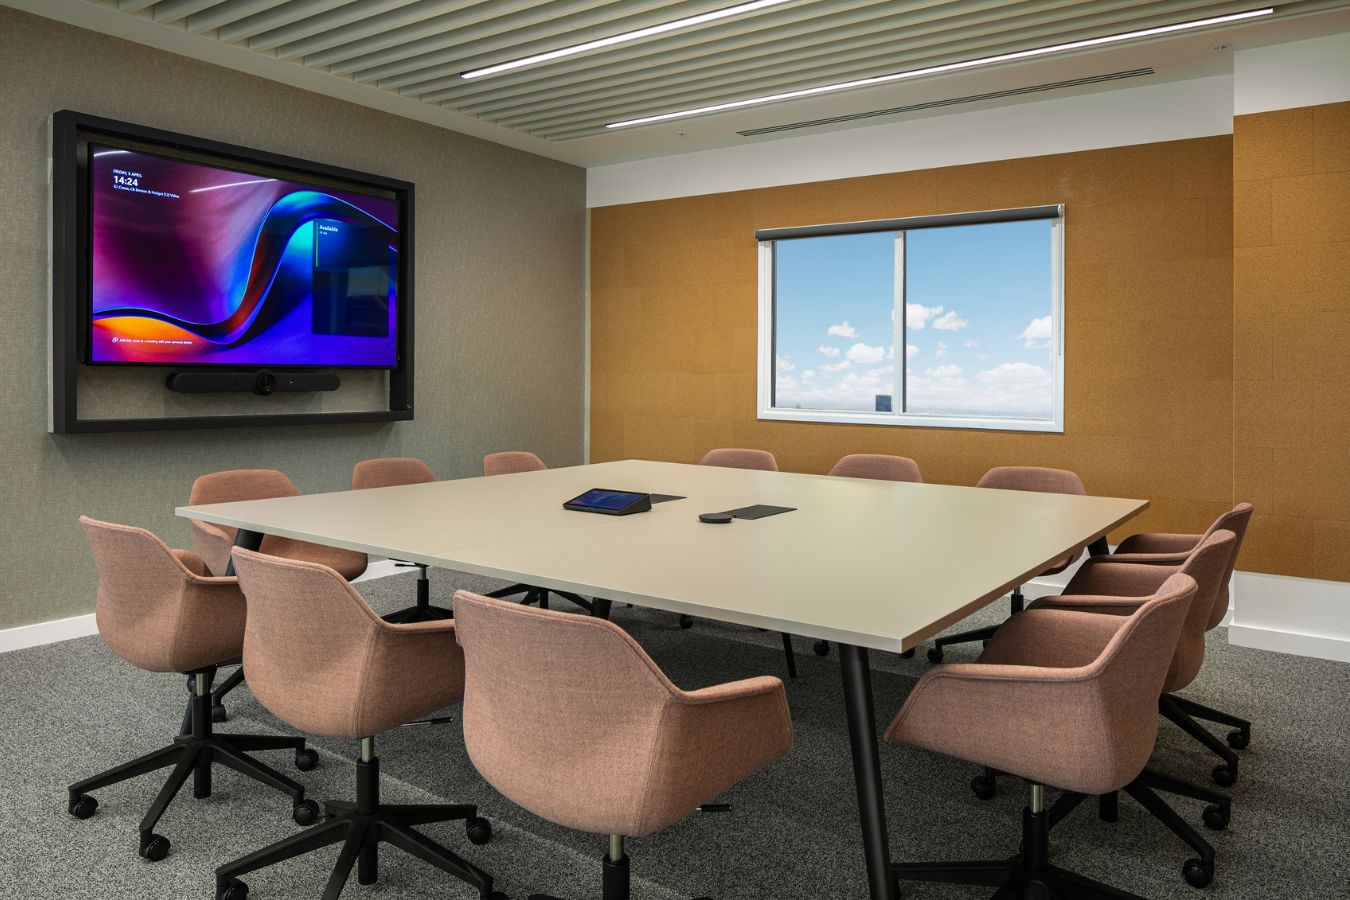 Well lit conference room with modern technology